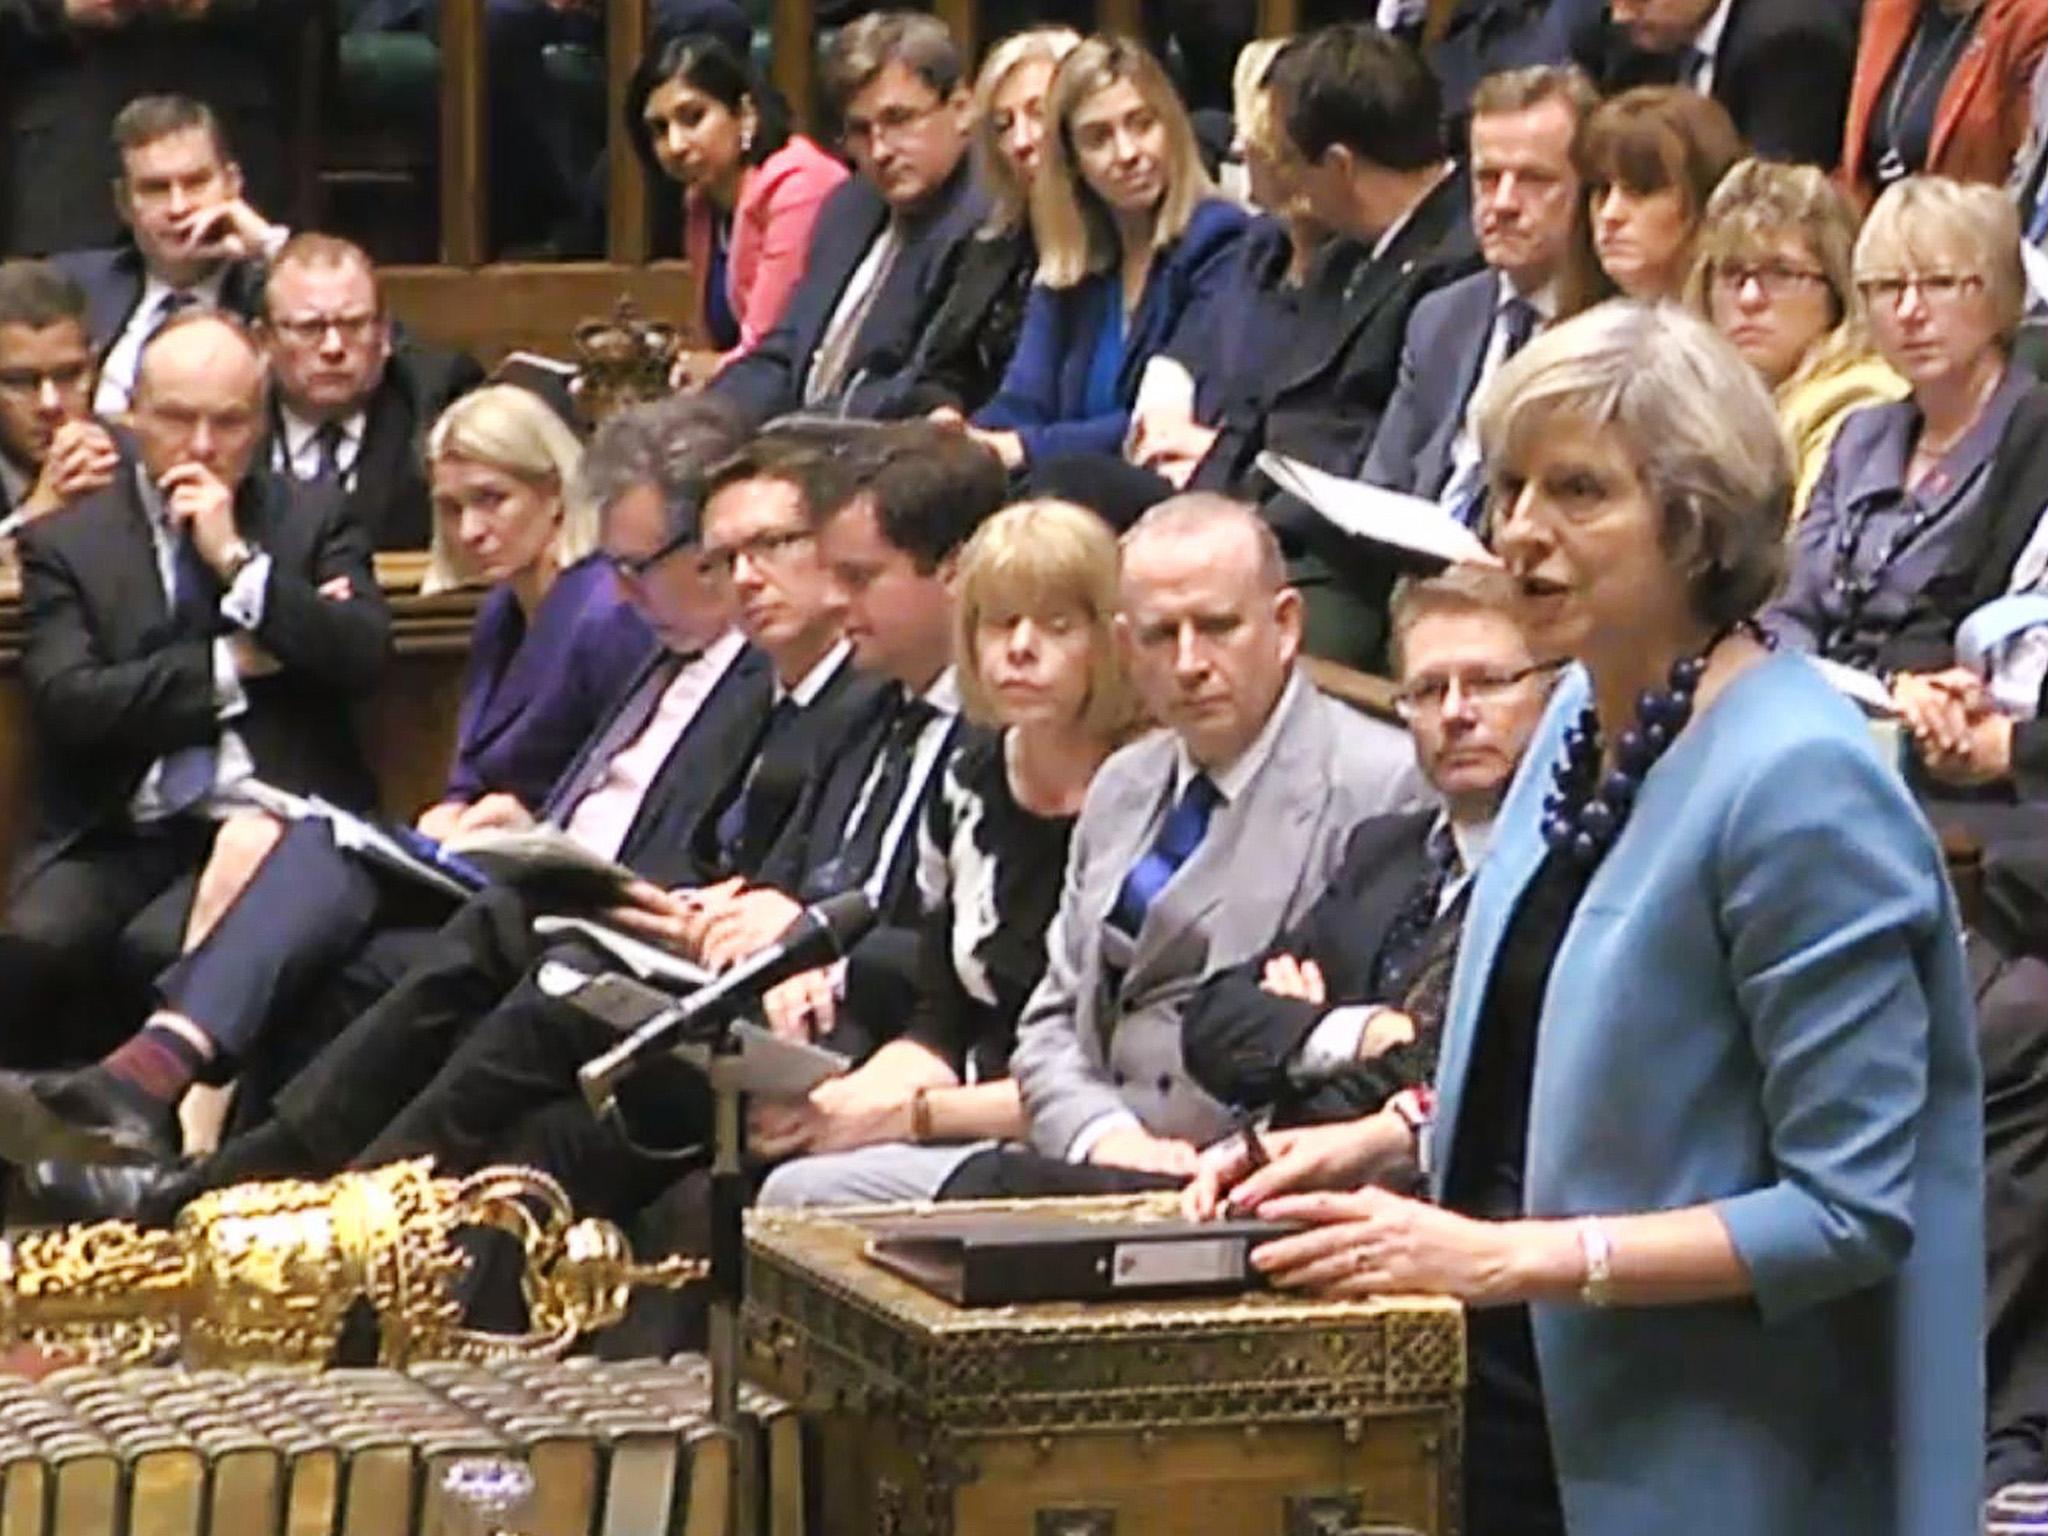 Theresa May speaks during Prime Minister's Questions in the House of Commons, London